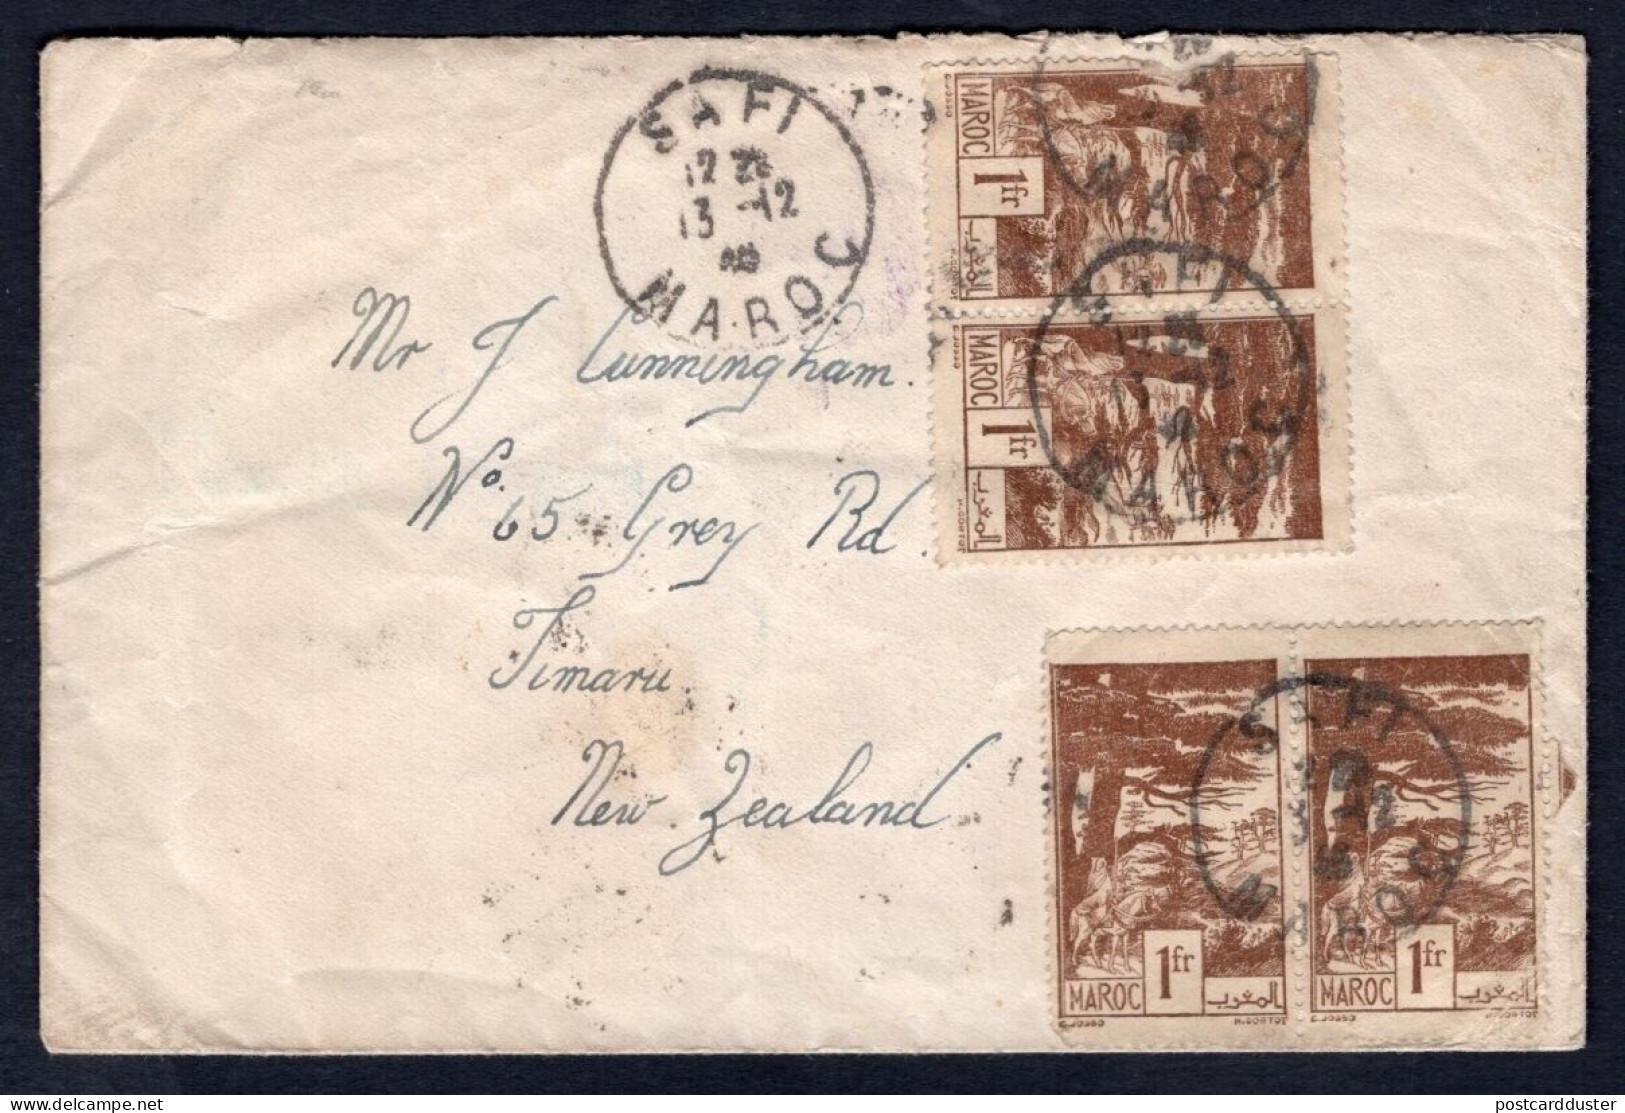 MOROCCO Safi 1948 Multi Franking On Cover To New Zealand (p1609) - Morocco (1956-...)